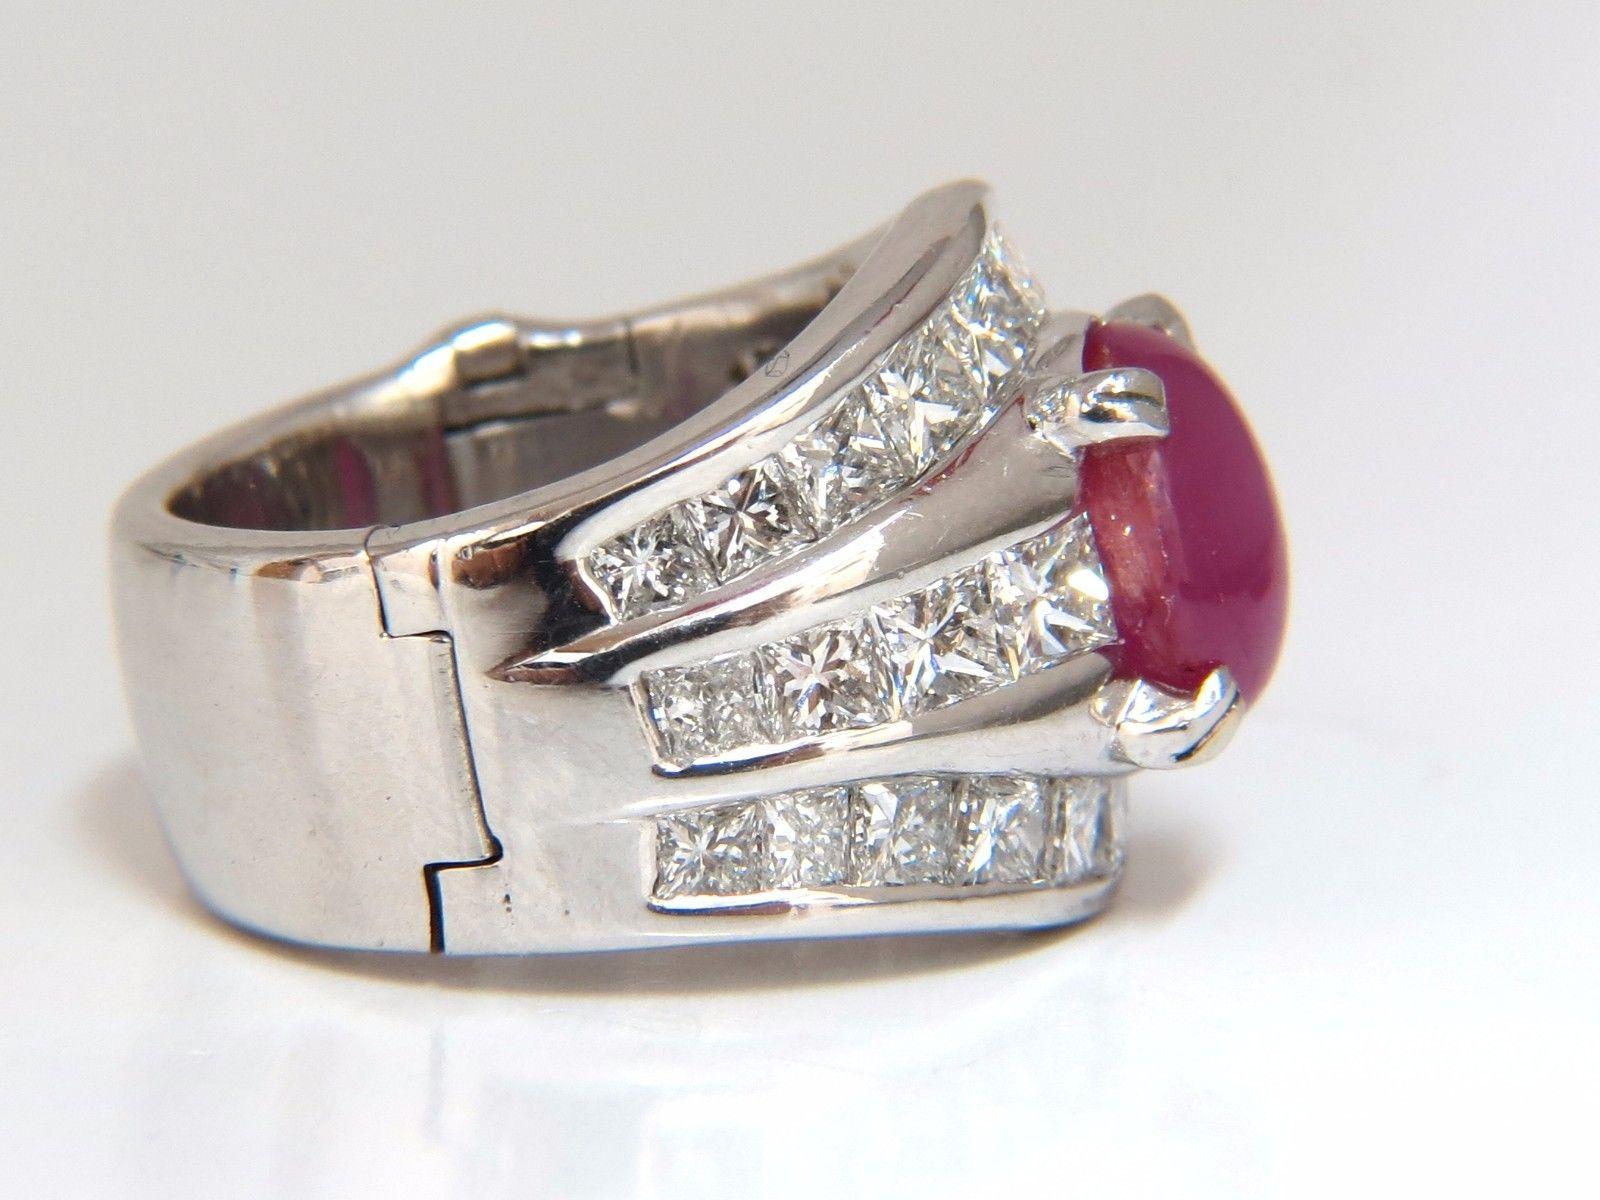 Star Ruby Ring / Large Knuckle option.

3.32ct. Natural GIA Certified Ruby Ring

GIA Certified Report ID: 2165111521

9.30 X 7.31 X 4.97mm

Oval Cabochon Cut, Translucent

No Heat, No Enhancement



3.00ct. Diamonds.

Princess cuts

H-color Vs-2